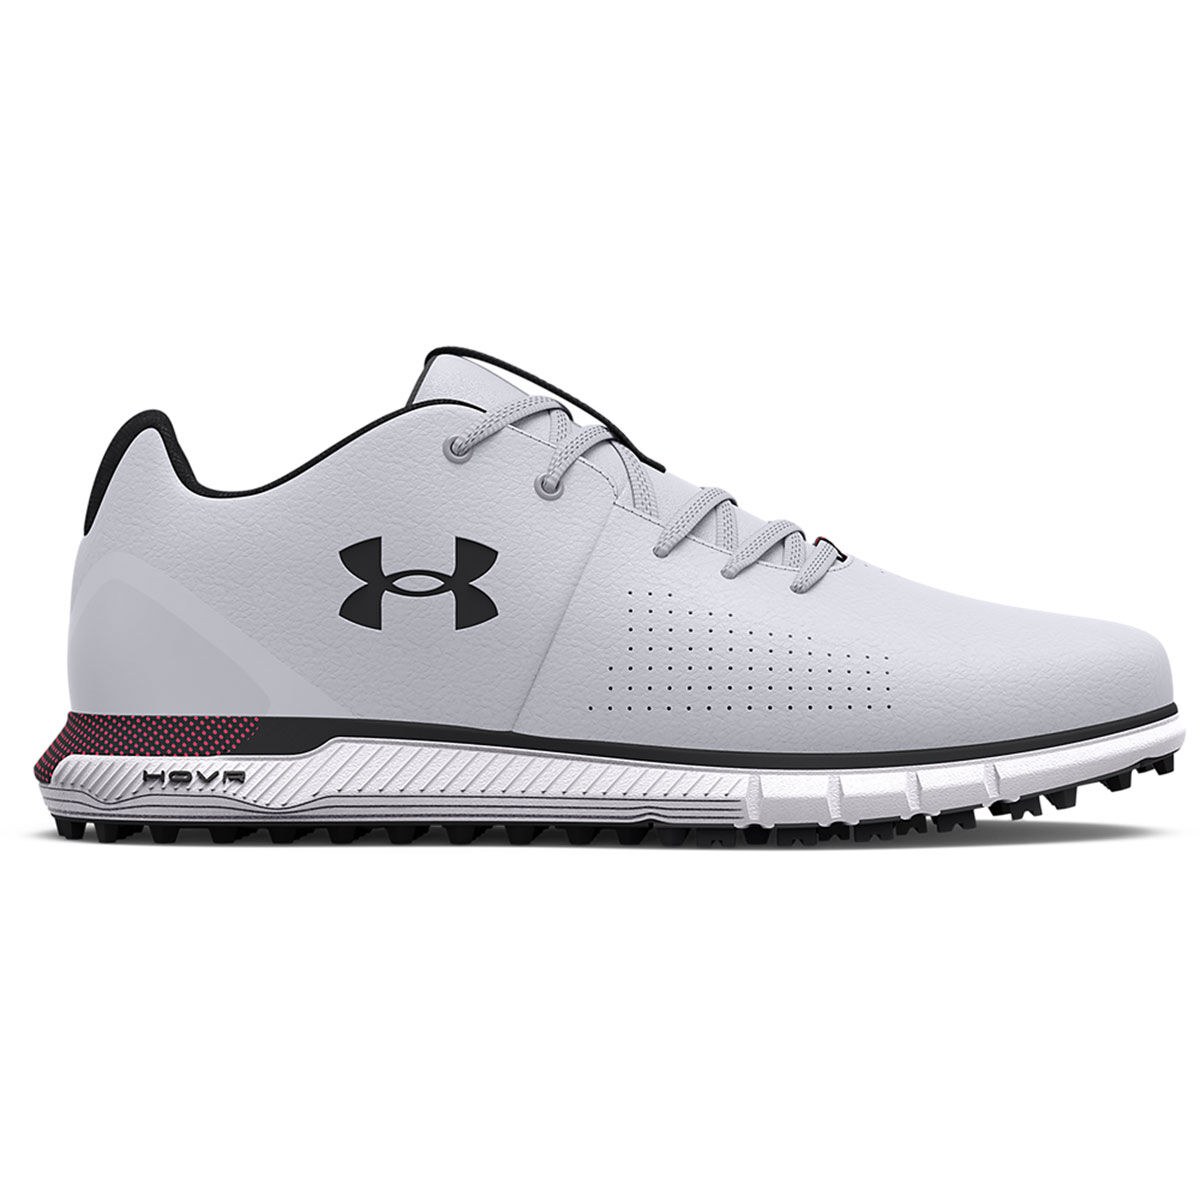 Under Armour Mens Grey and Black HOVR Fade 2 Wide Golf Shoes, Size: 8 | American Golf